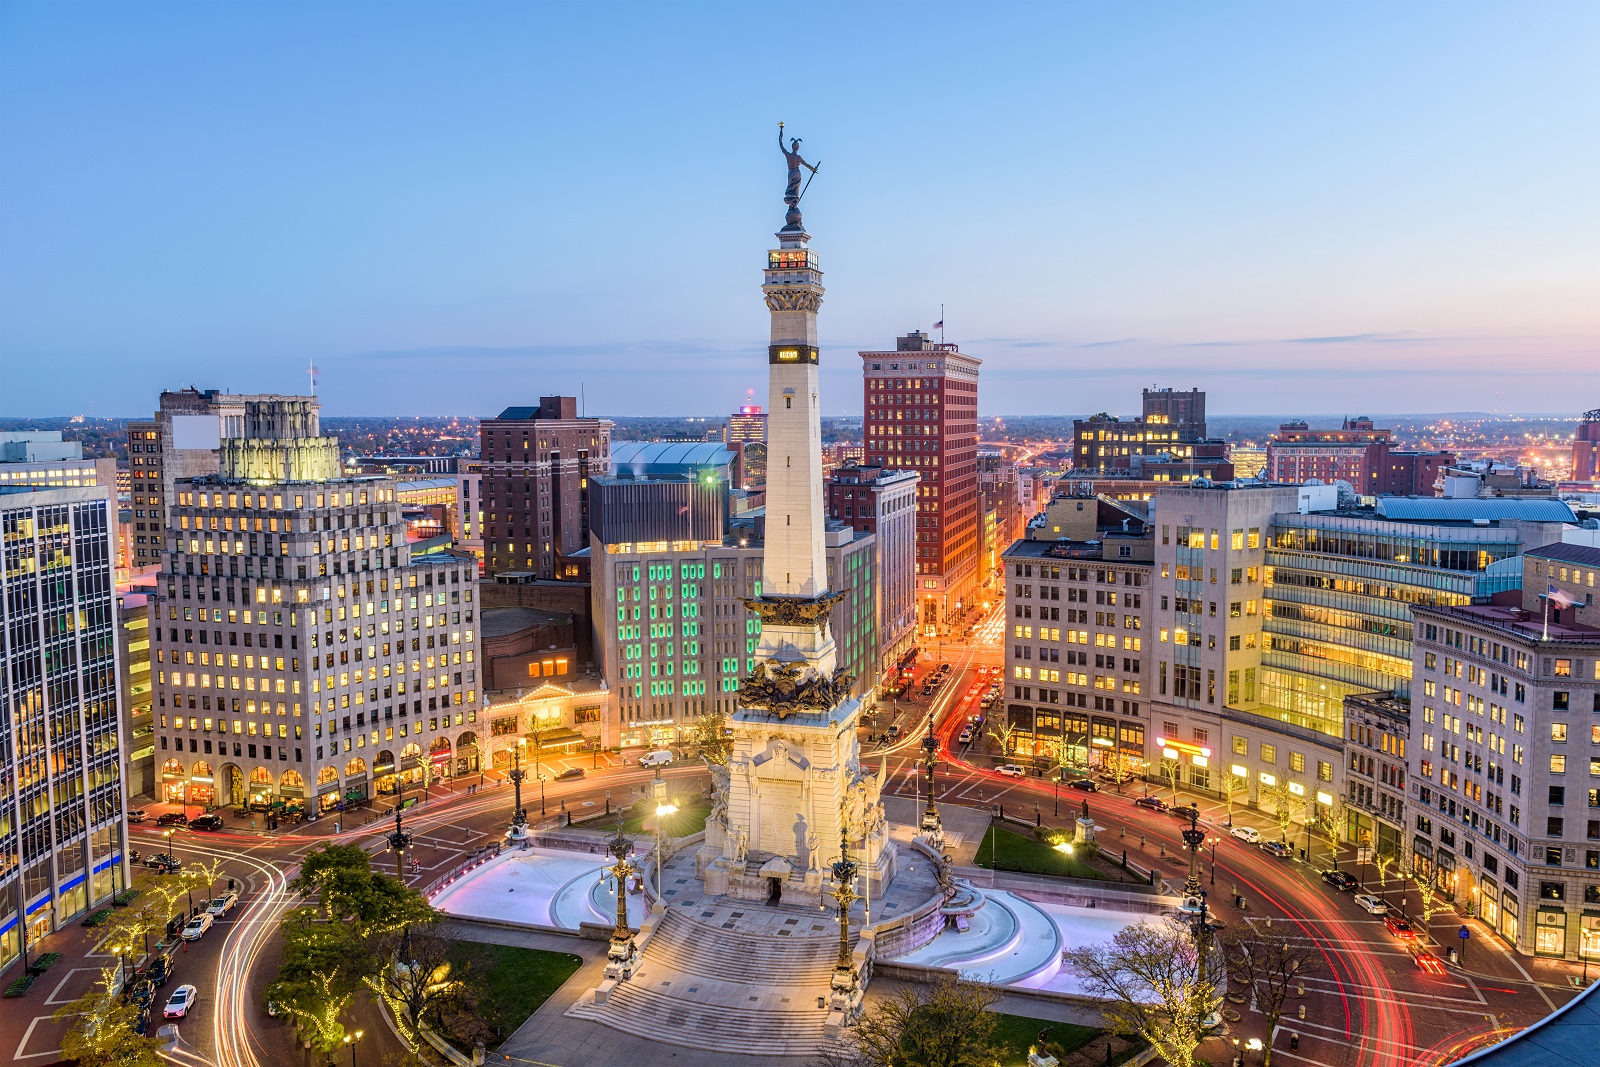 <p class="wp-caption-text">Image Credit: Shutterstock / Sean Pavone</p>  <p><span>With its well-planned roads and affordable parking, Indianapolis is tailor-made for drivers. The city’s layout ensures that driving is often the quickest way to navigate.</span></p>